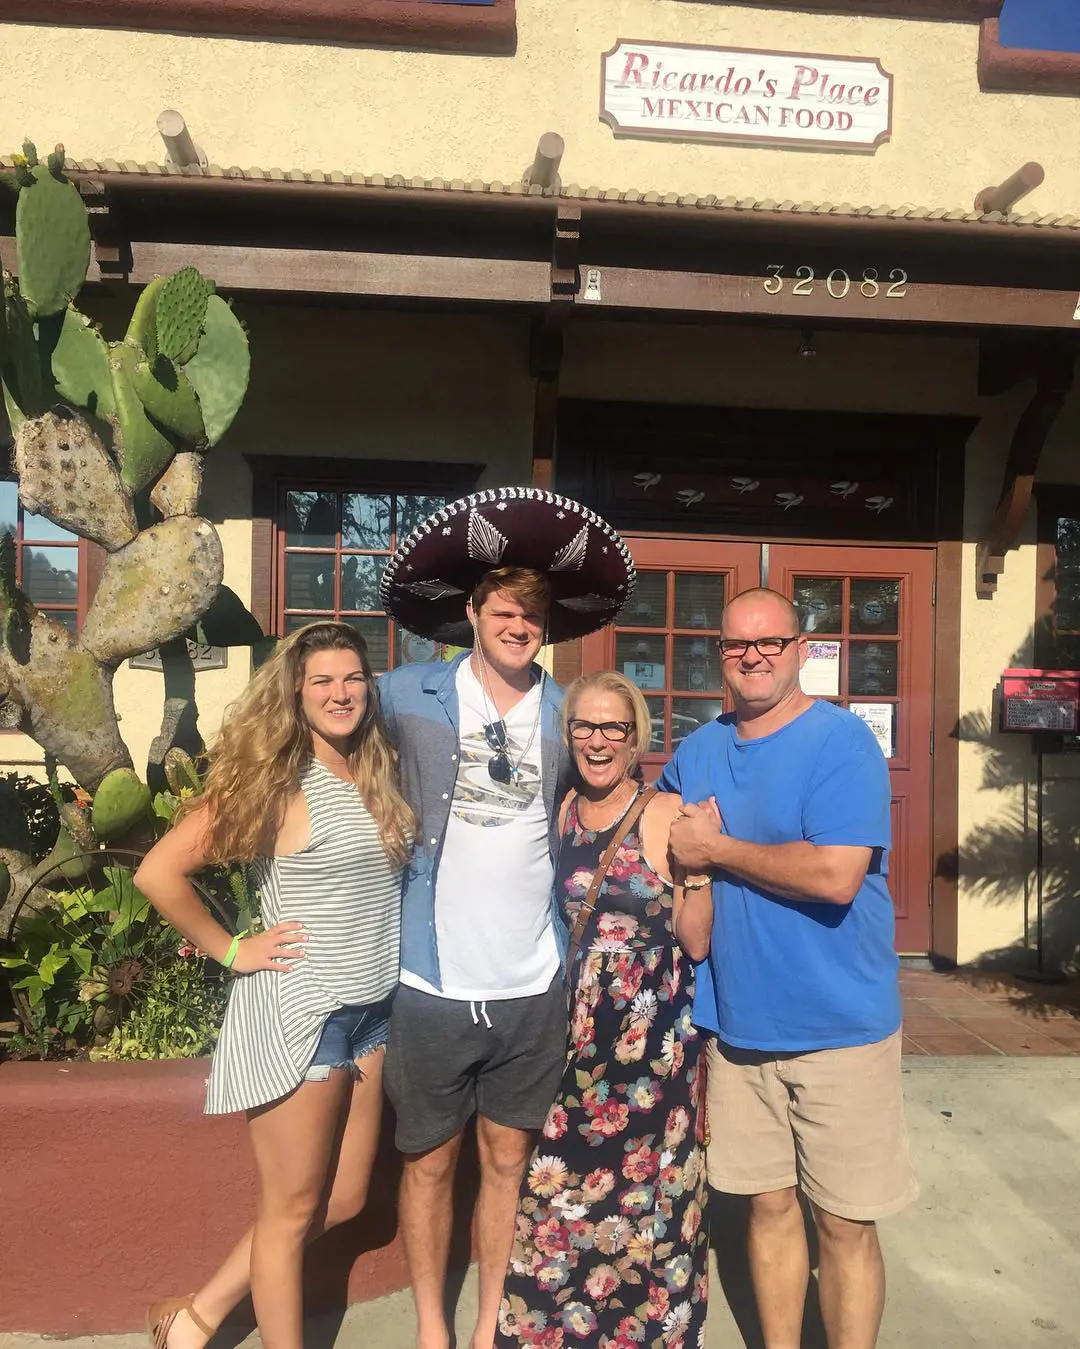 Carolina Panthers QB Darnold enjoying dinner with his family at Ricardo's Place Mexican Food restaurant in June 2016